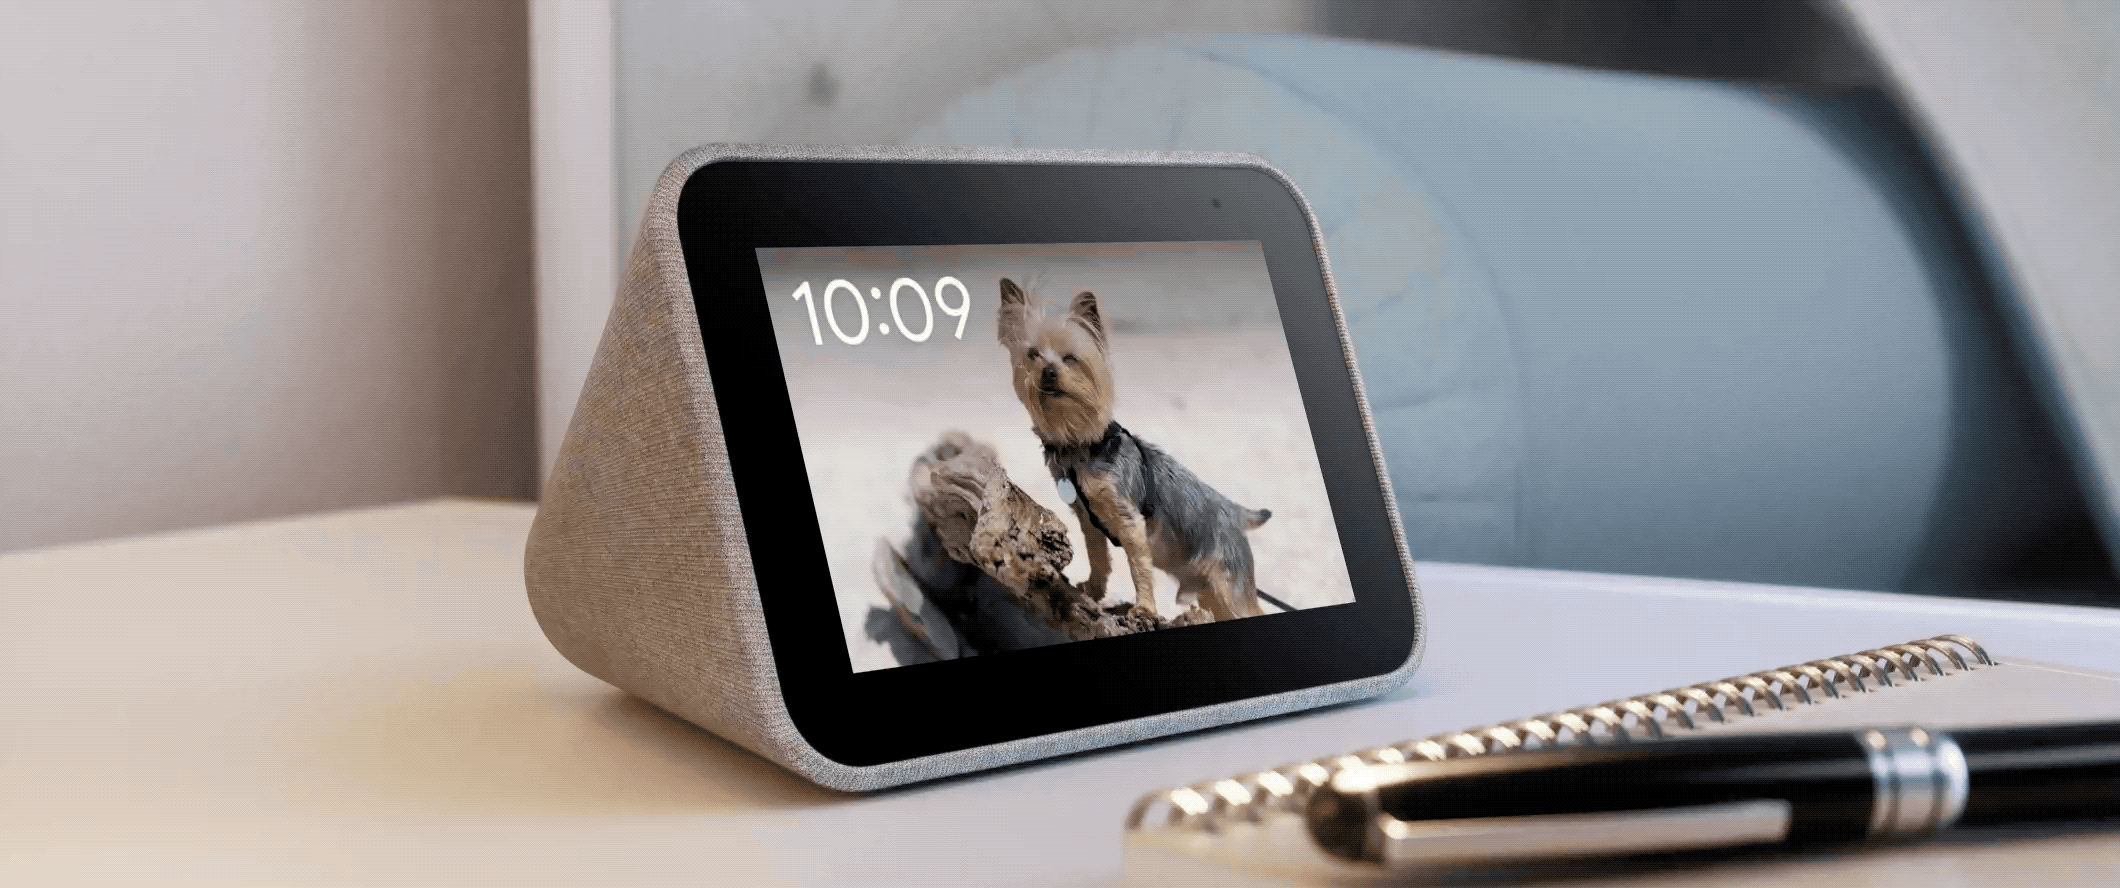 Lenovo's Smart Clock gets more useful with latest Google update | TechCrunch